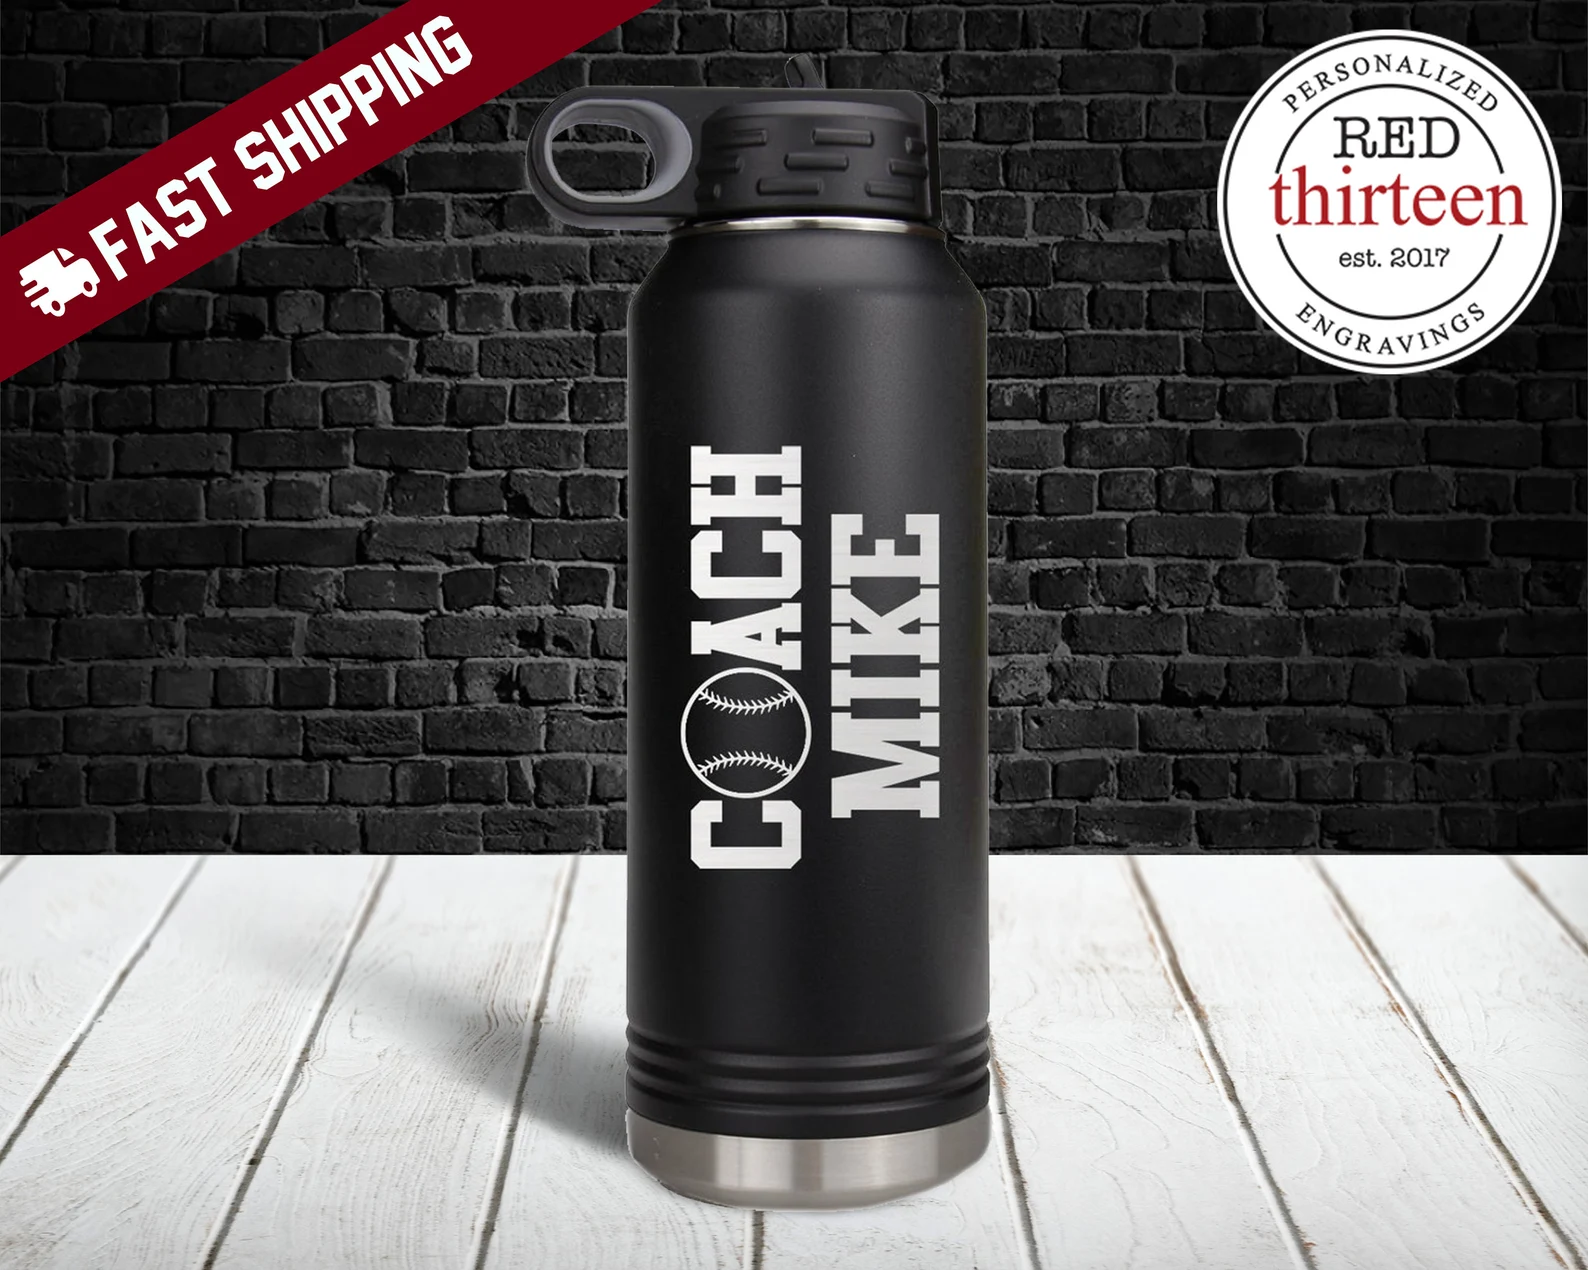 Baseball coach gifts that are great for the field: personalized gifts like a personalized water bottle!